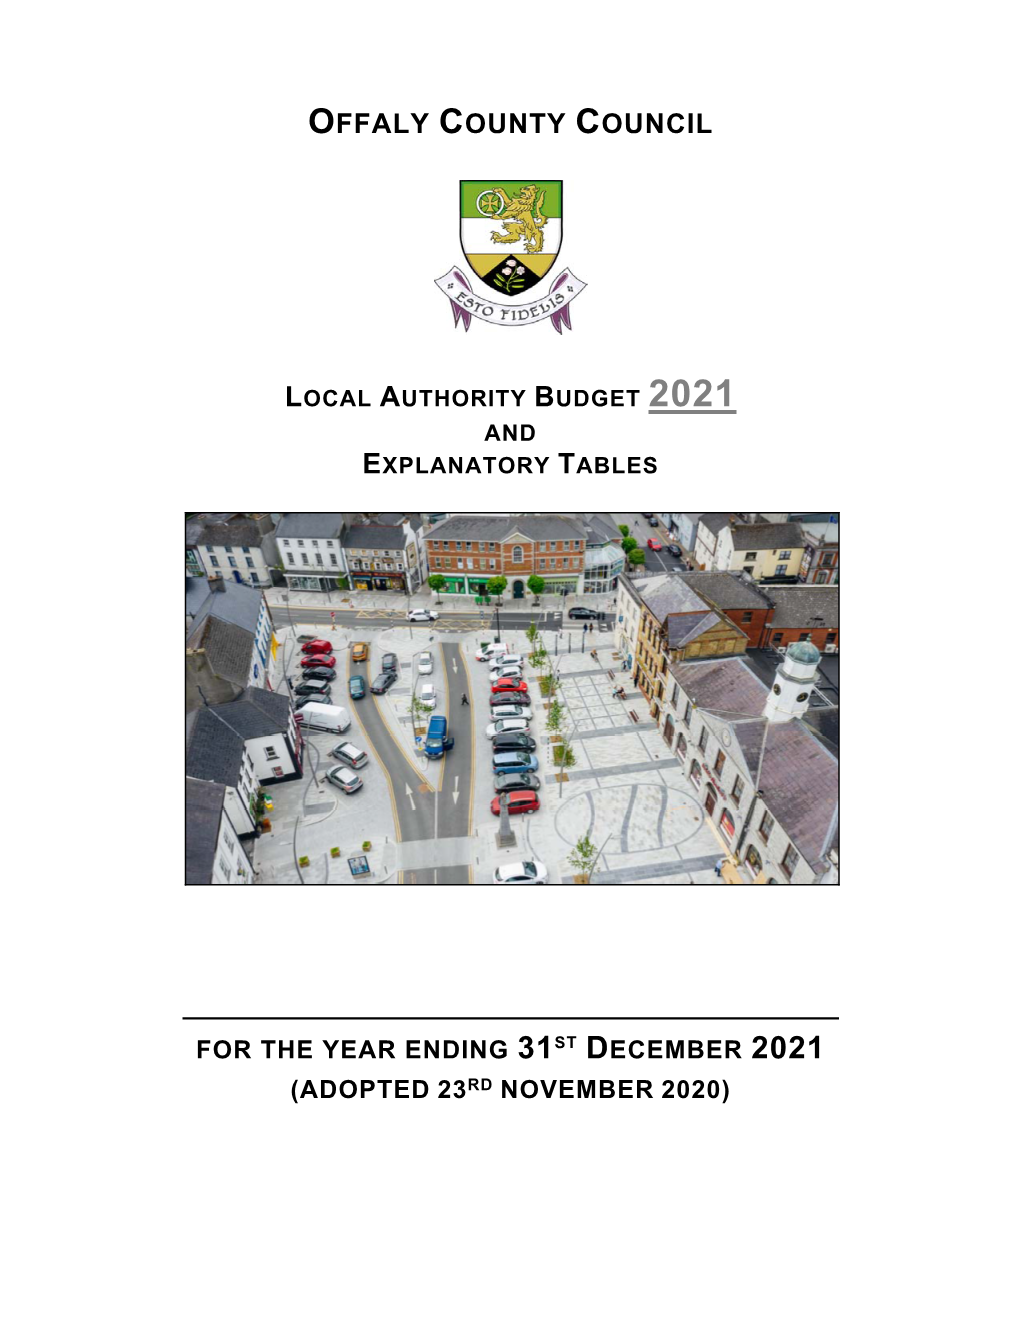 Local Authority Budget 2021 and Explanatory Tables